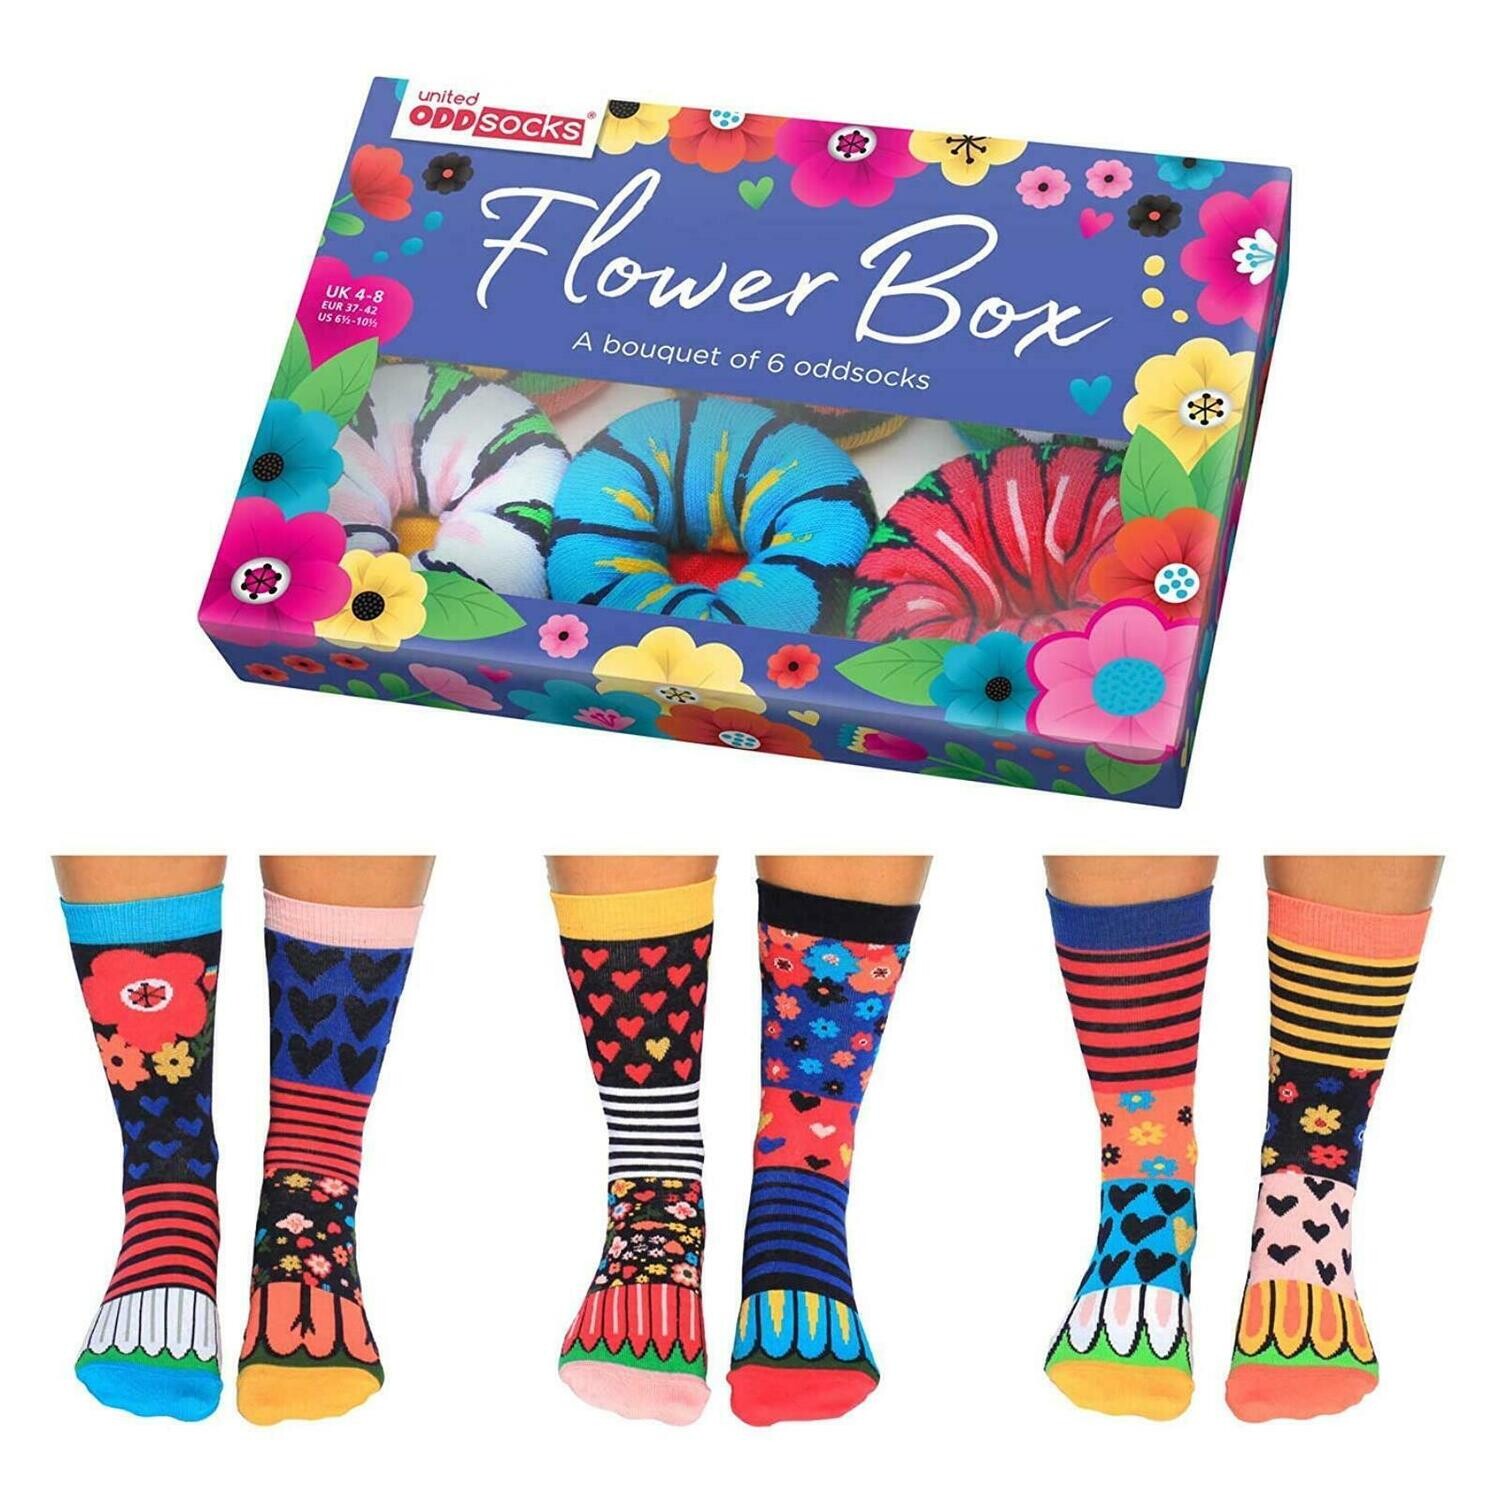 Ladies United Oddsocks Flower Box A Bouquet of 6 Odd Socks Gift Boxed